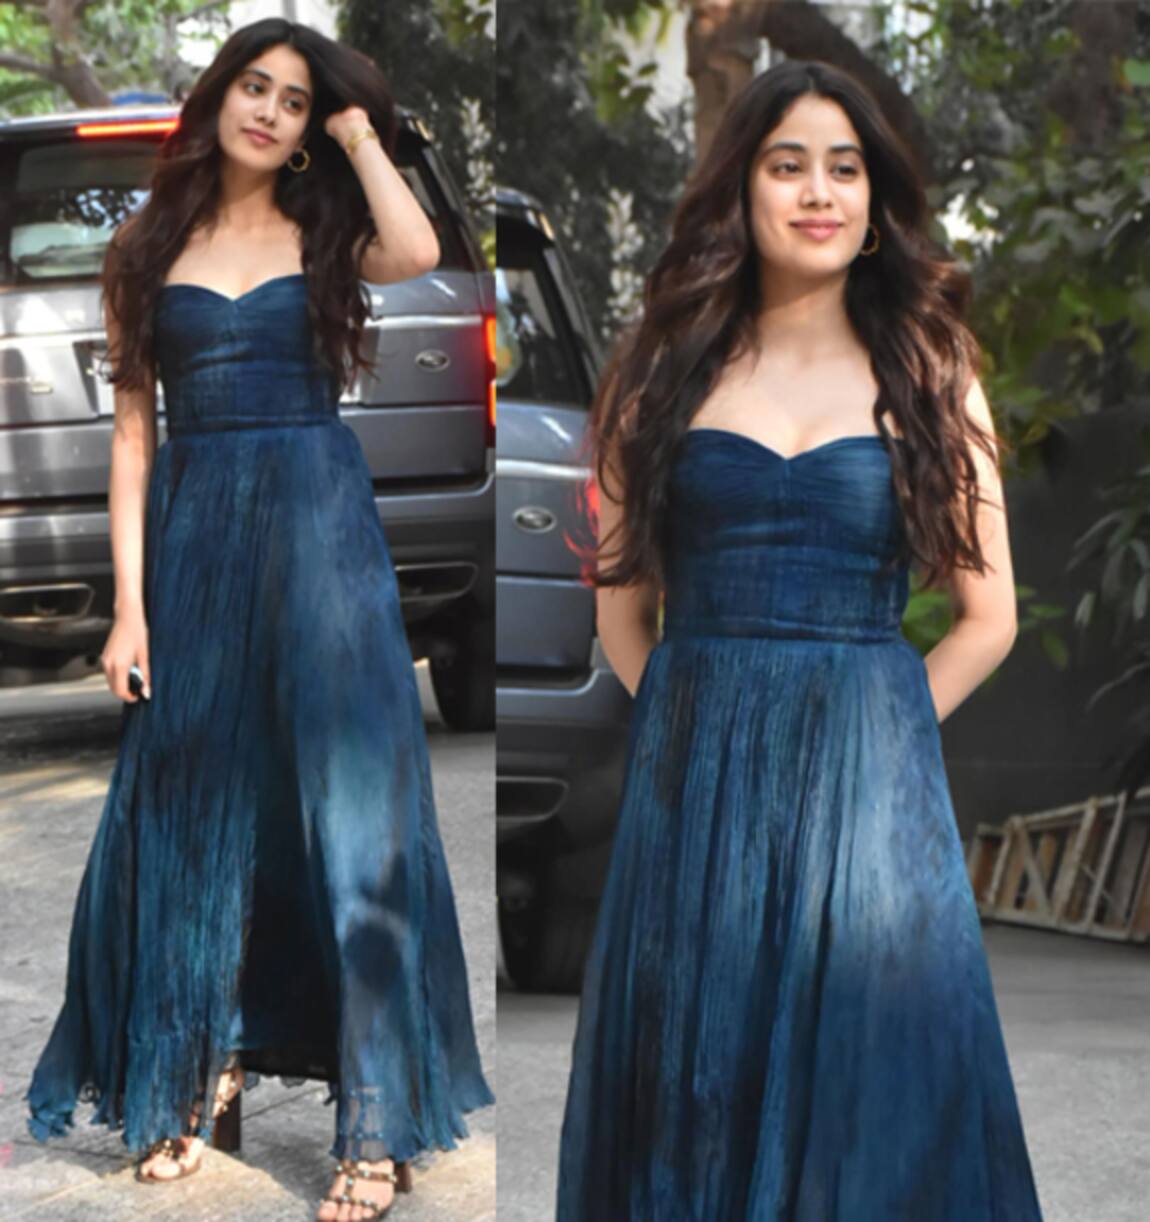 Janhvi Kapoor Broke All Red Carpet Rules With Her Bright Neon Dress